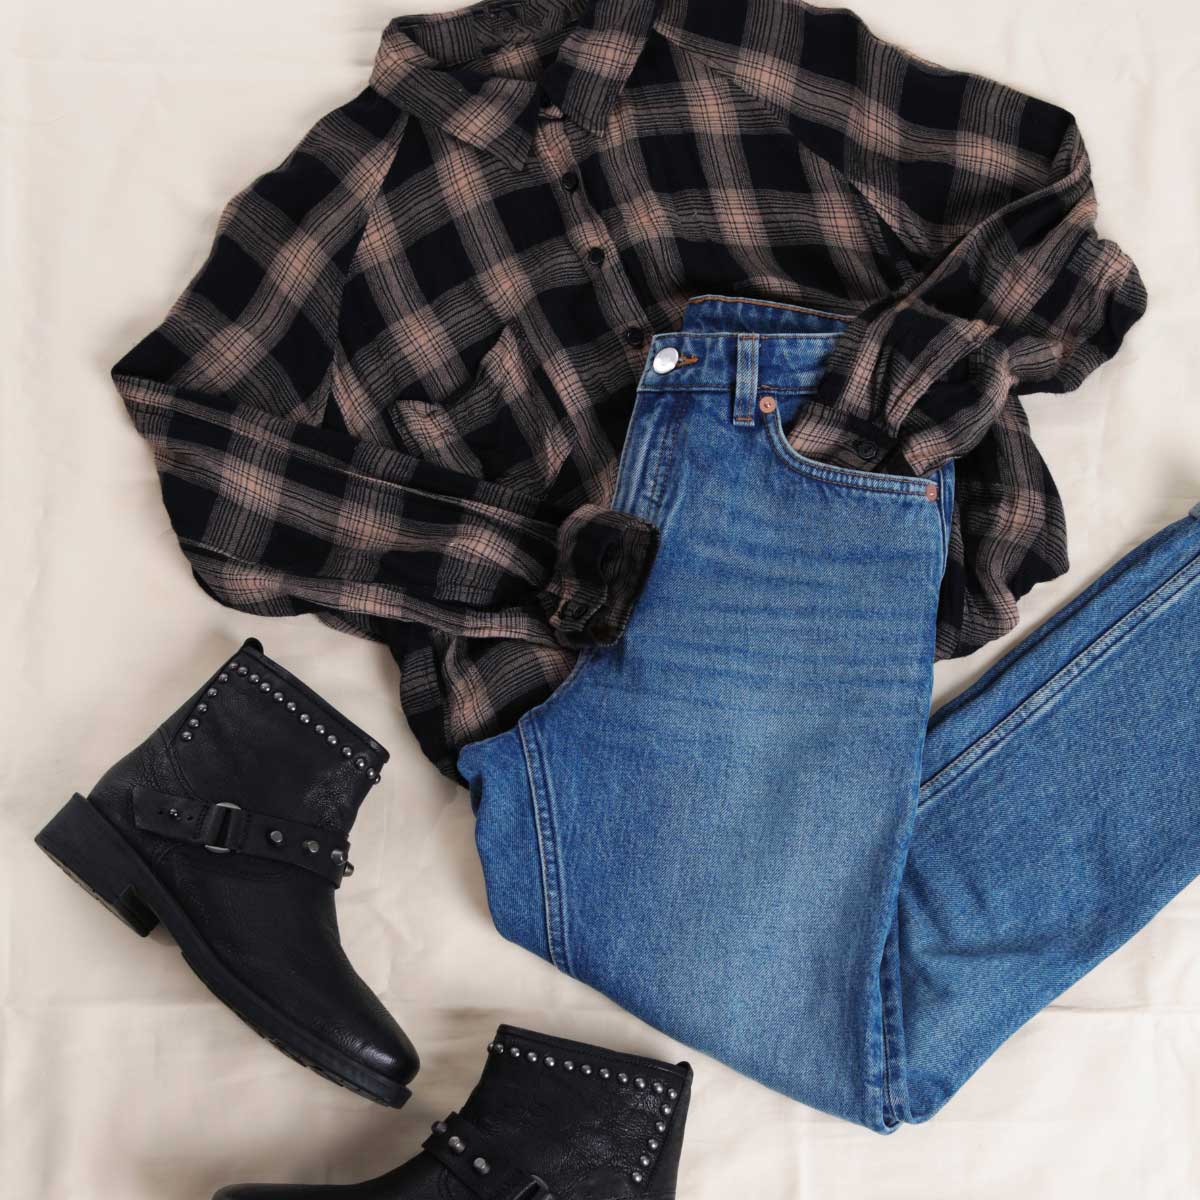 Flannel style outfit laid on ground